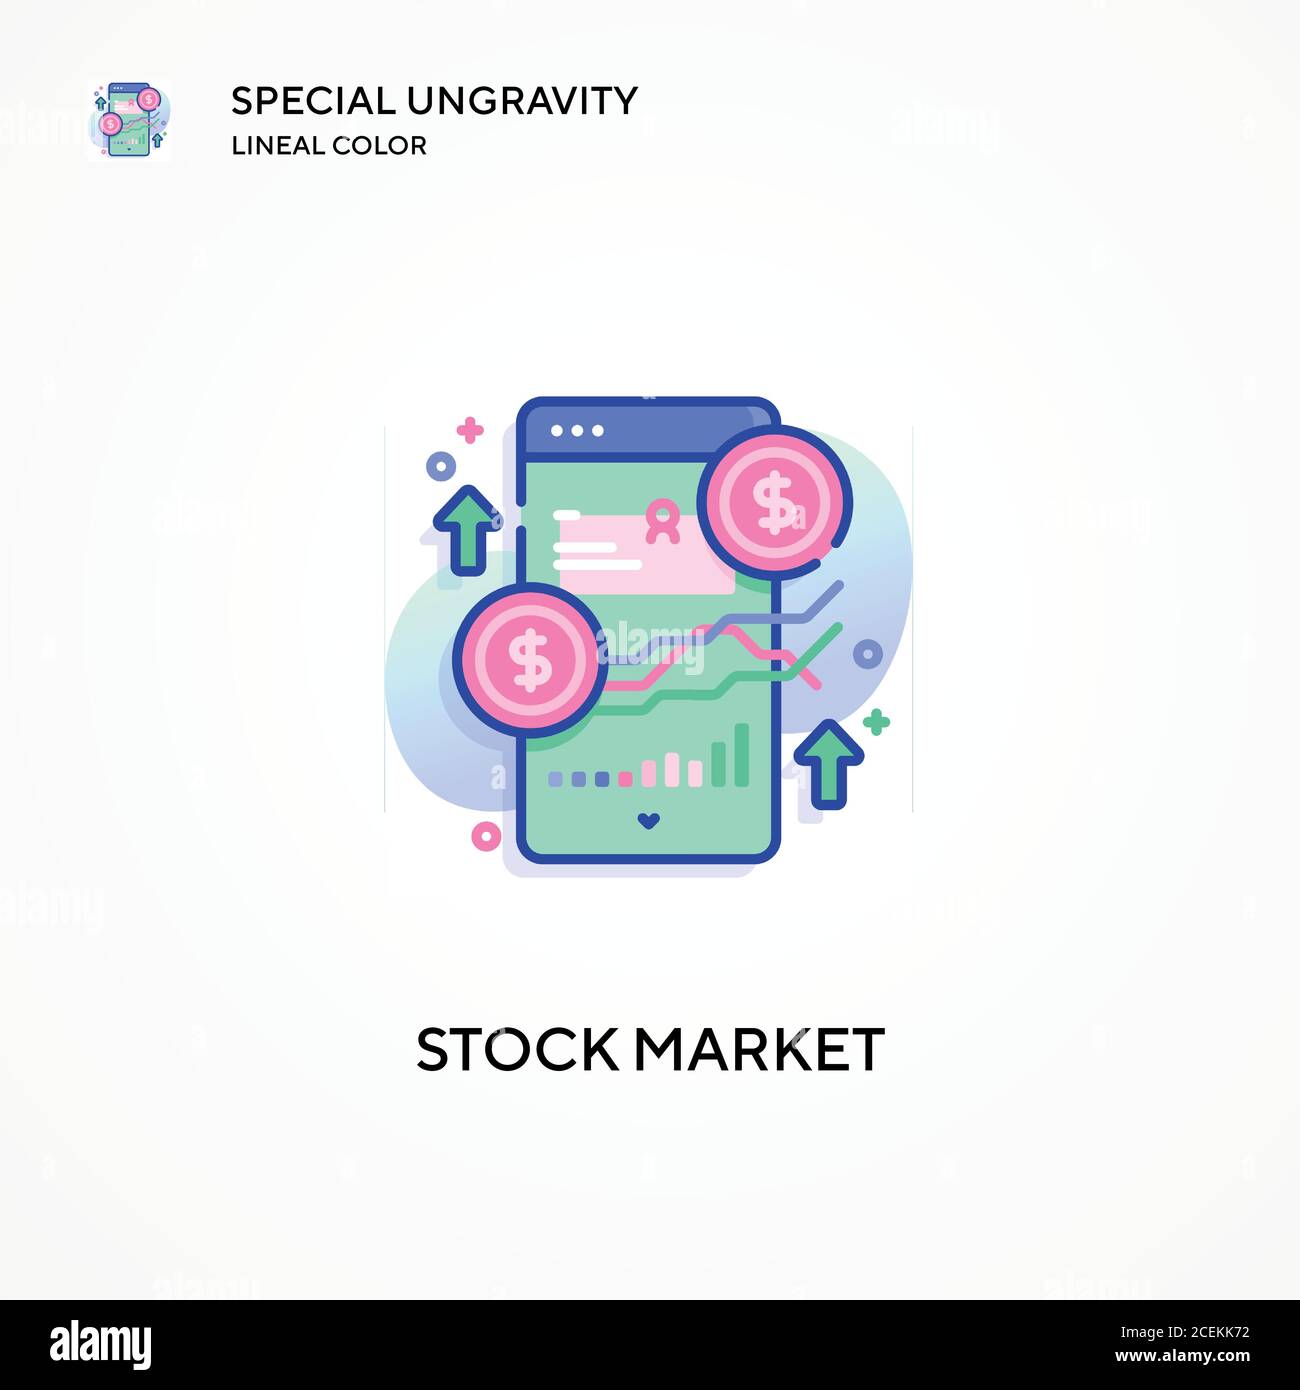 Stock market special ungravity lineal color icon. Modern vector illustration concepts. Easy to edit and customize. Stock Vector